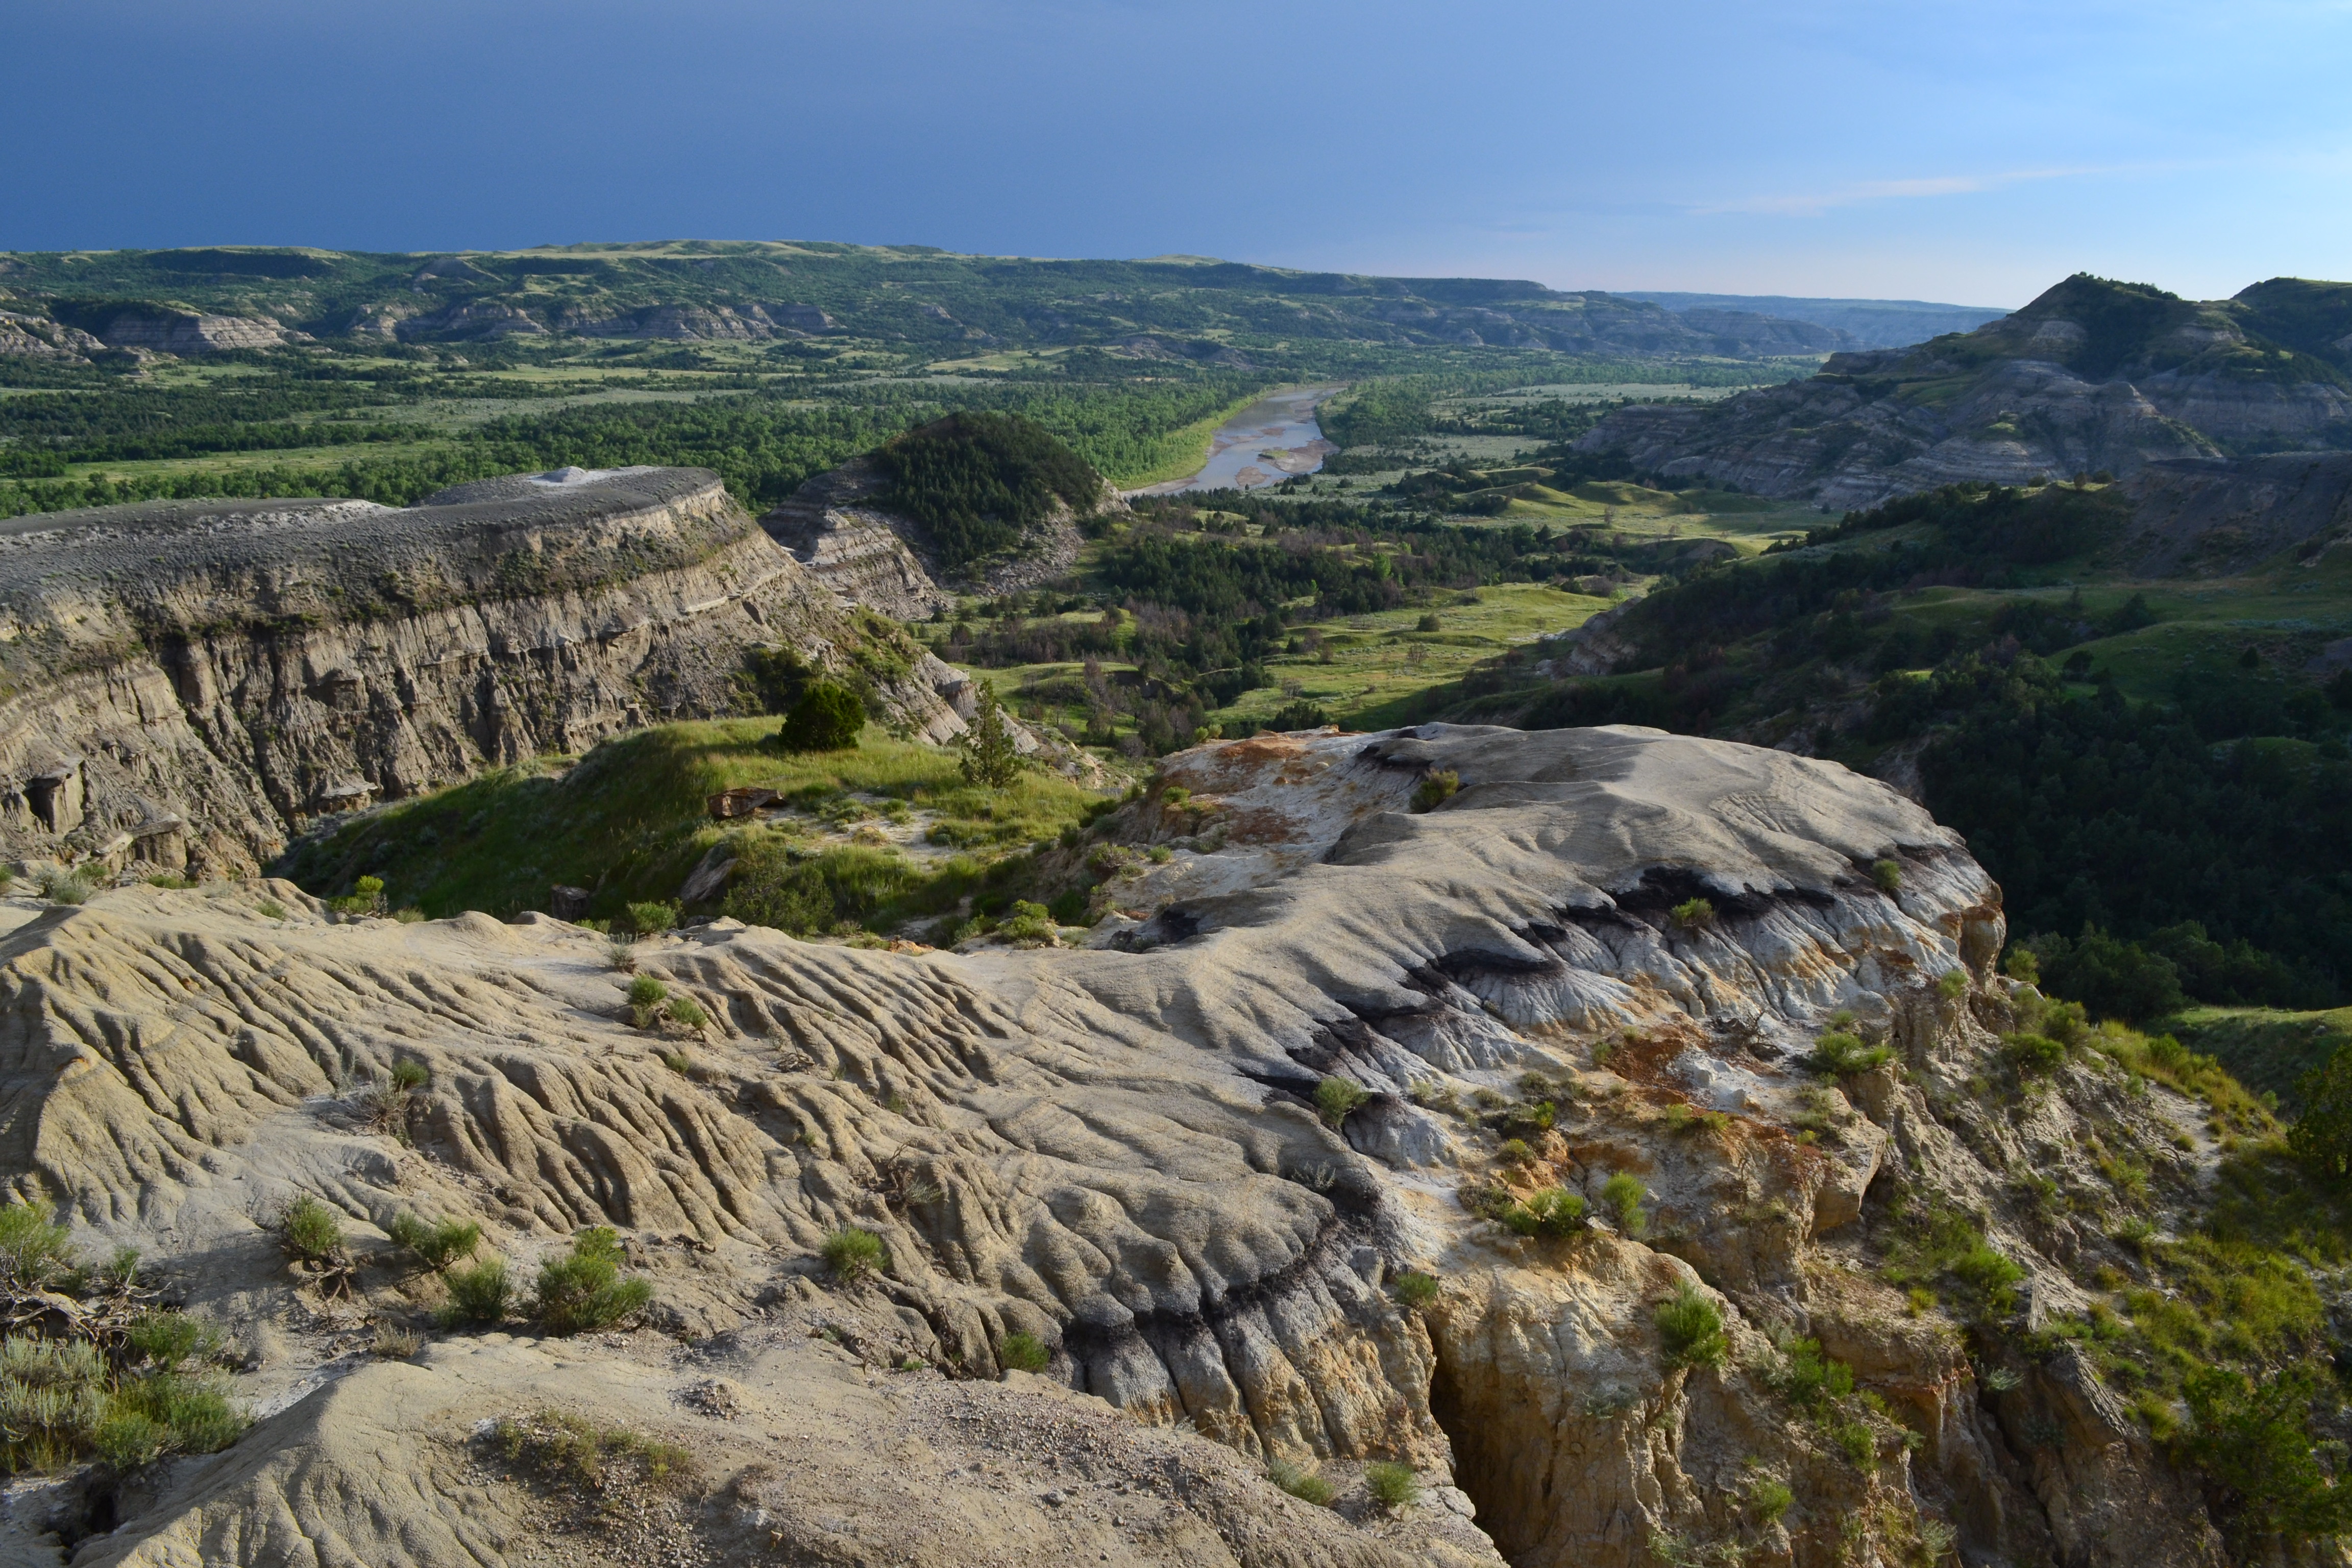 A colorfully striped butte in the foreground overlooks a dark green badlands landscape